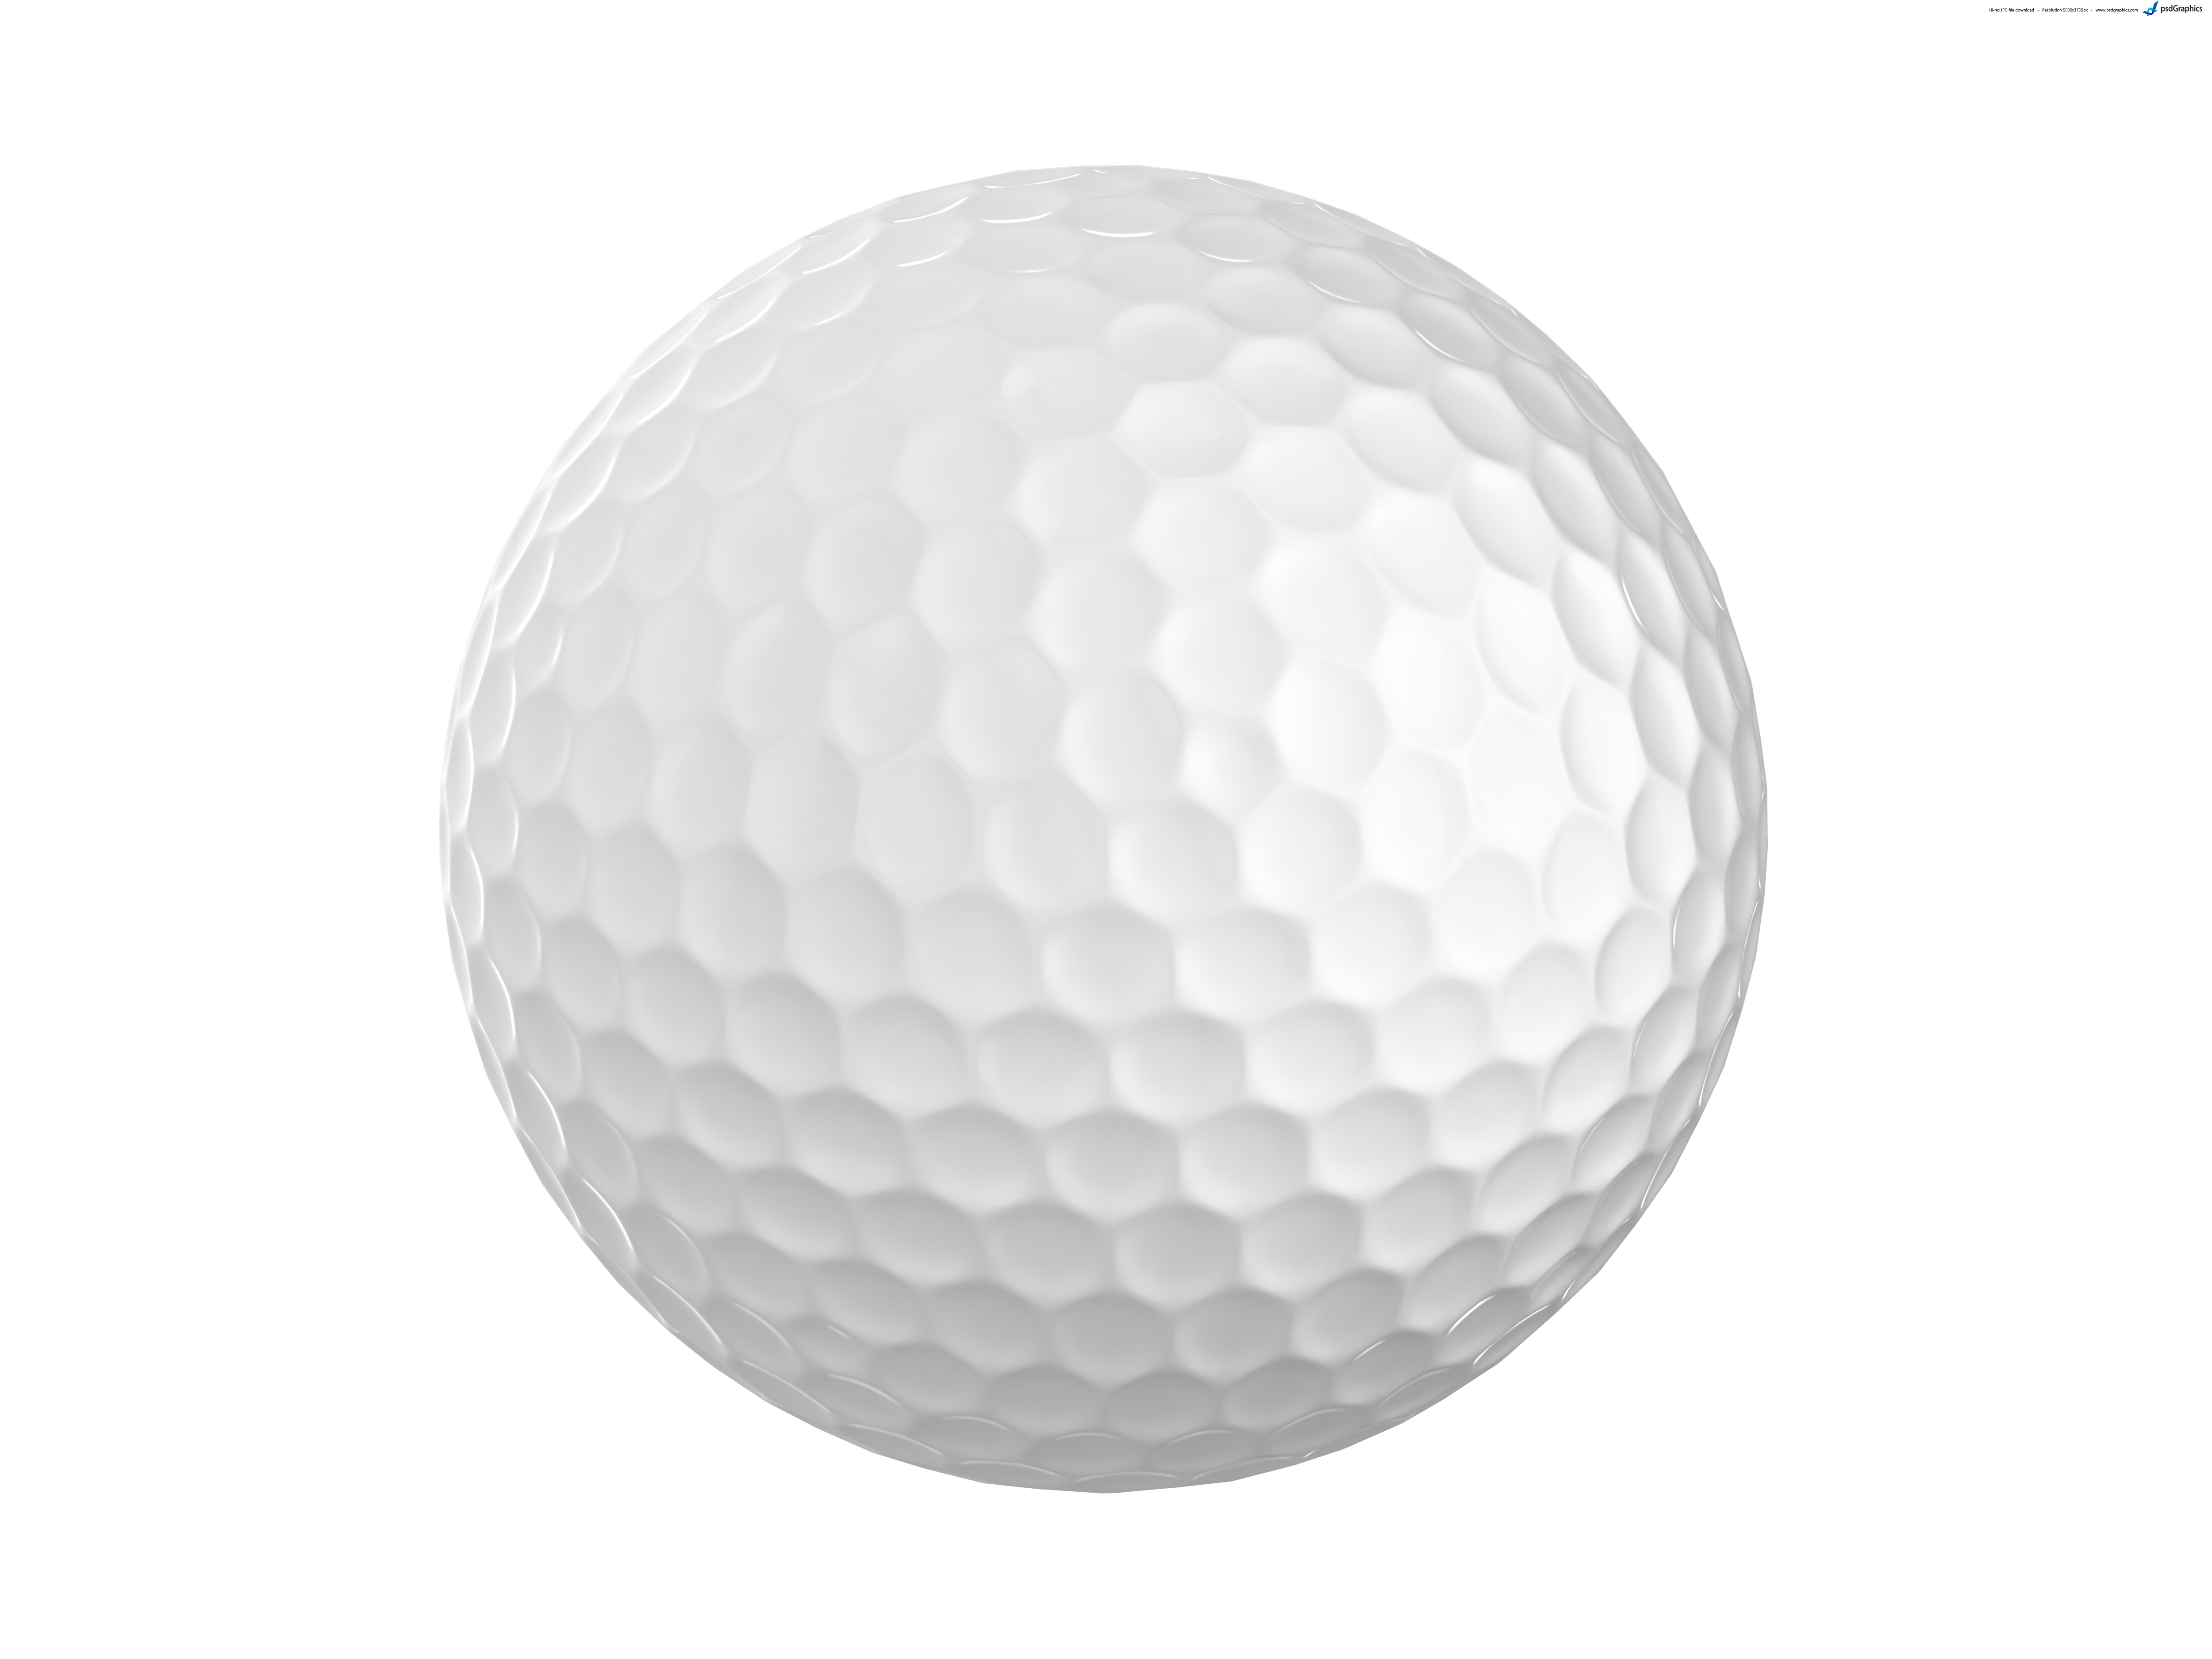 Golf Ball Isolated On White Background   Psdgraphics